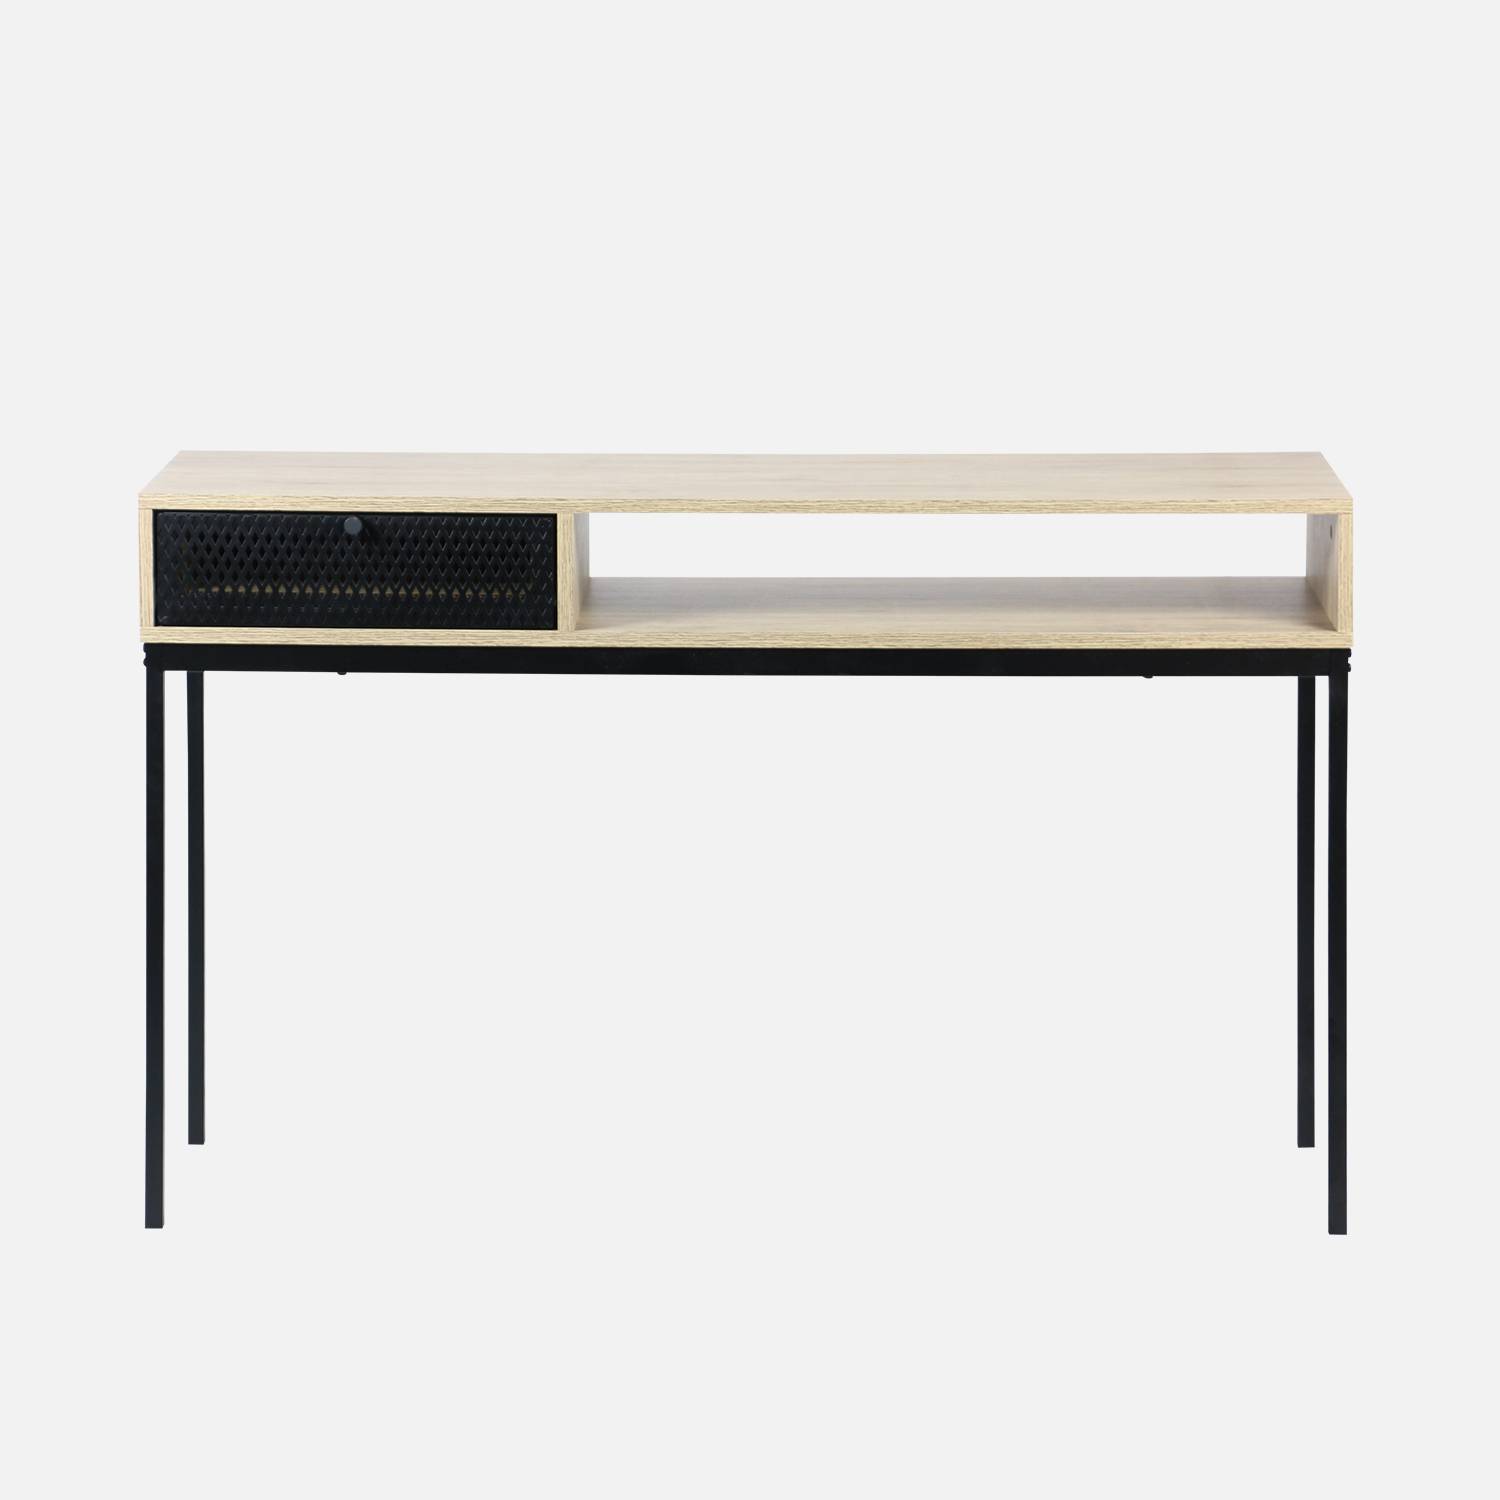 120cm Metal and wood-style hallway console table with storage nook, drawer & industrial metal legs - Brooklyn Photo4